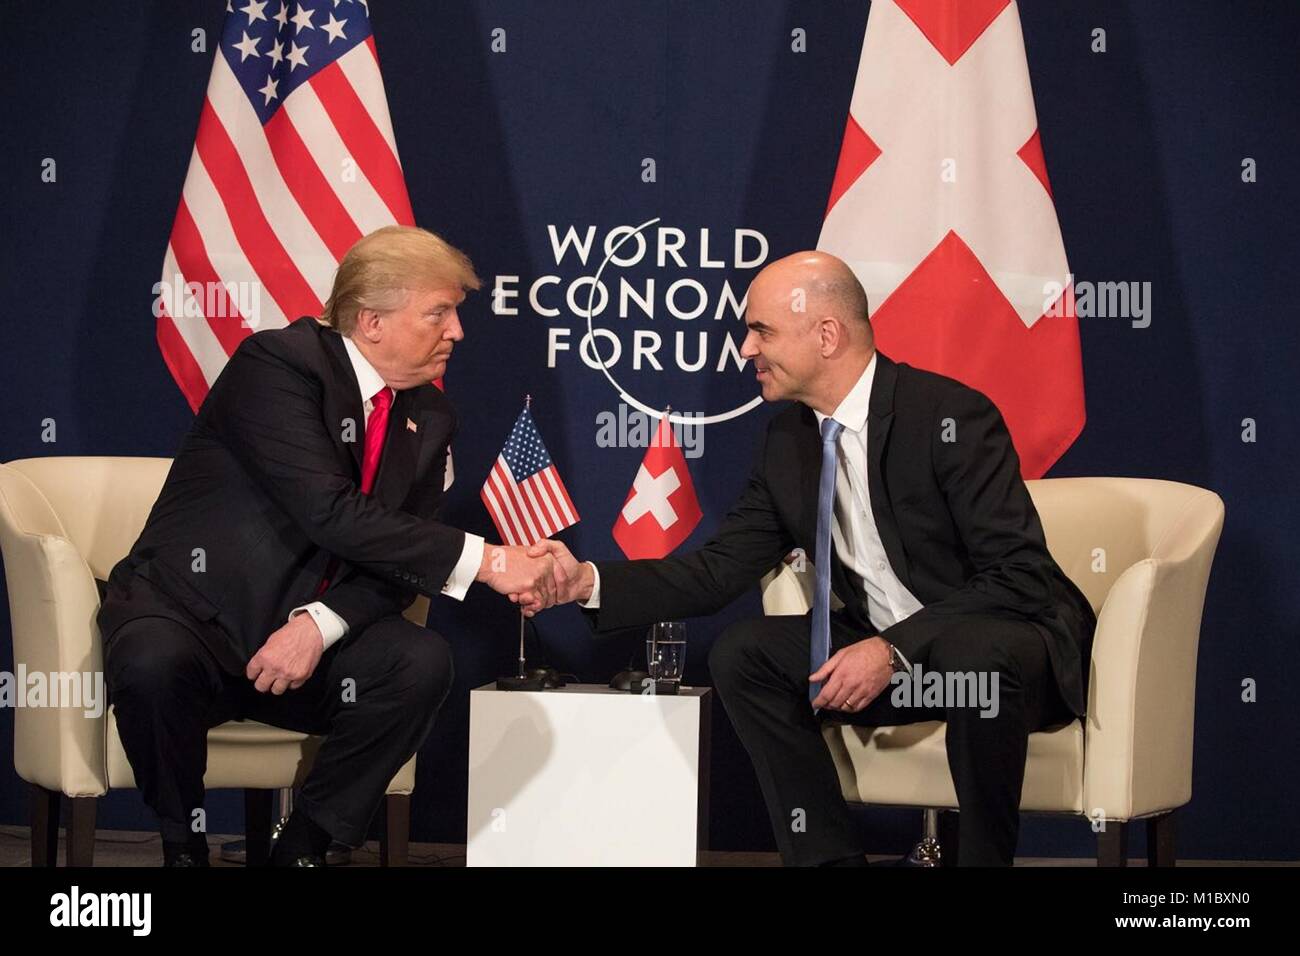 U.S President Donald Trump shakes hands with Swiss President Alain Berset, right, during a bilateral meeting on the sidelines of the World Economic Forum January 26, 2018 in Davos, Switzerland. Stock Photo